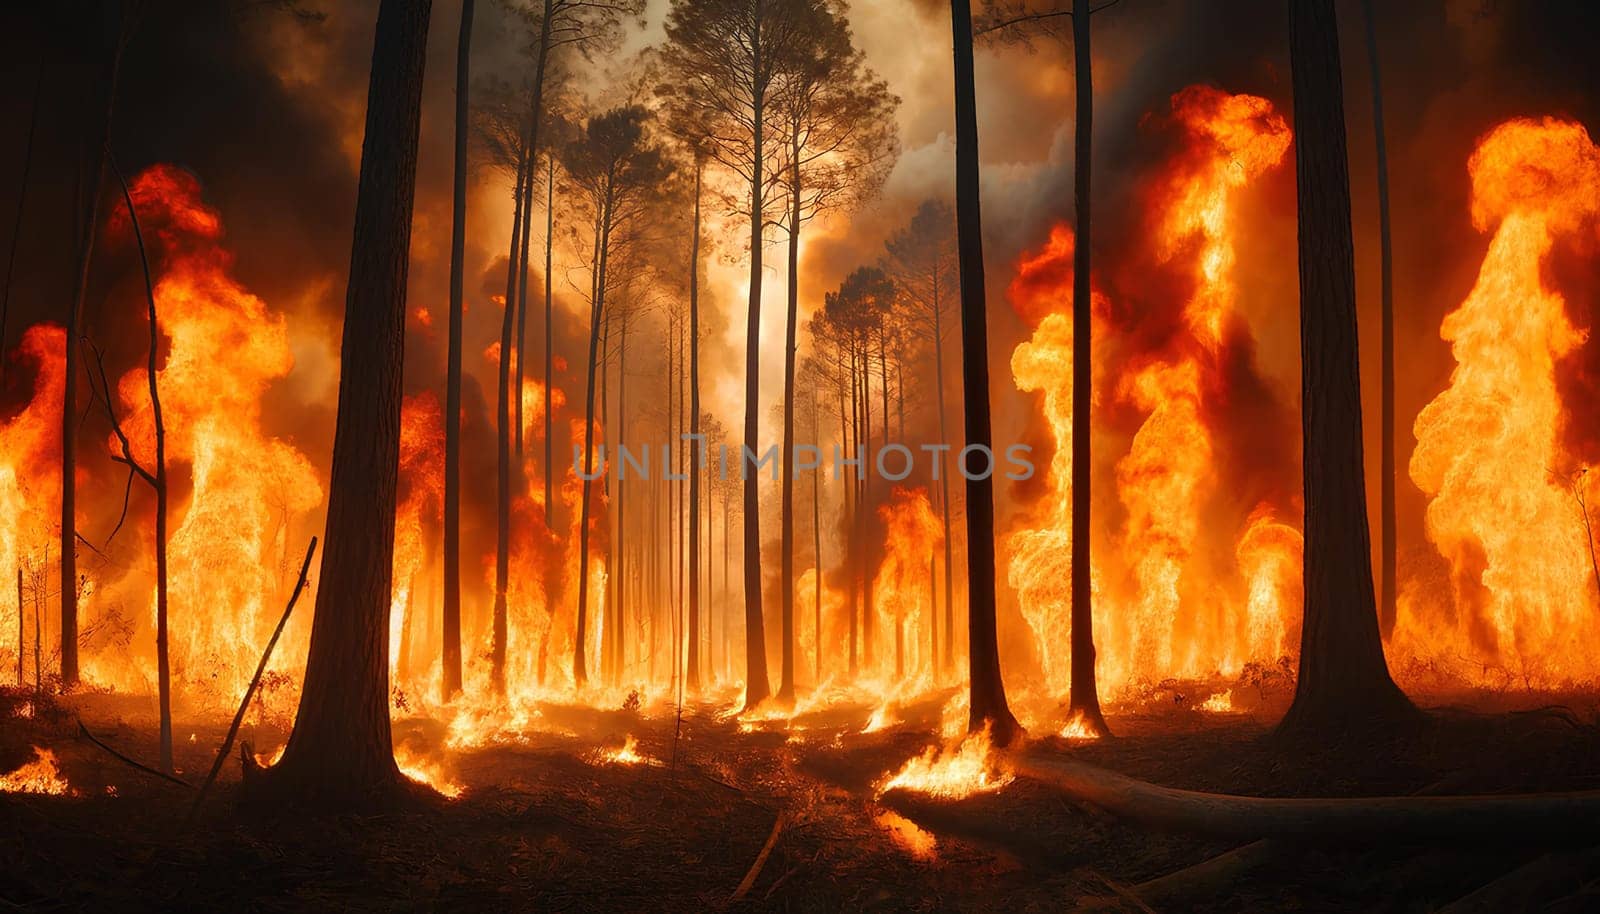 A strong forest fire, the entire forest is engulfed in flames